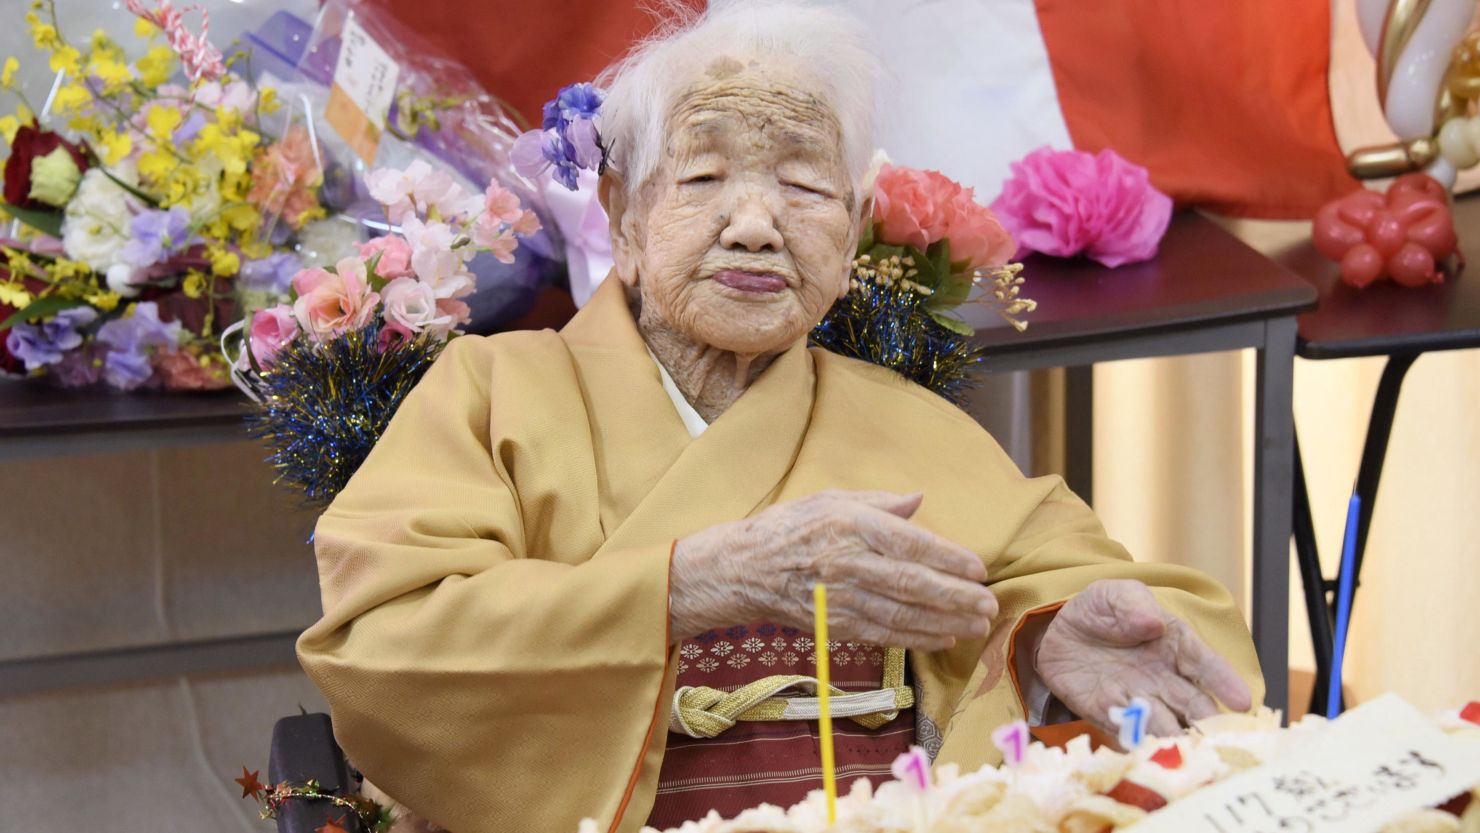 Kane Tanaka was the second-oldest person ever recorded.